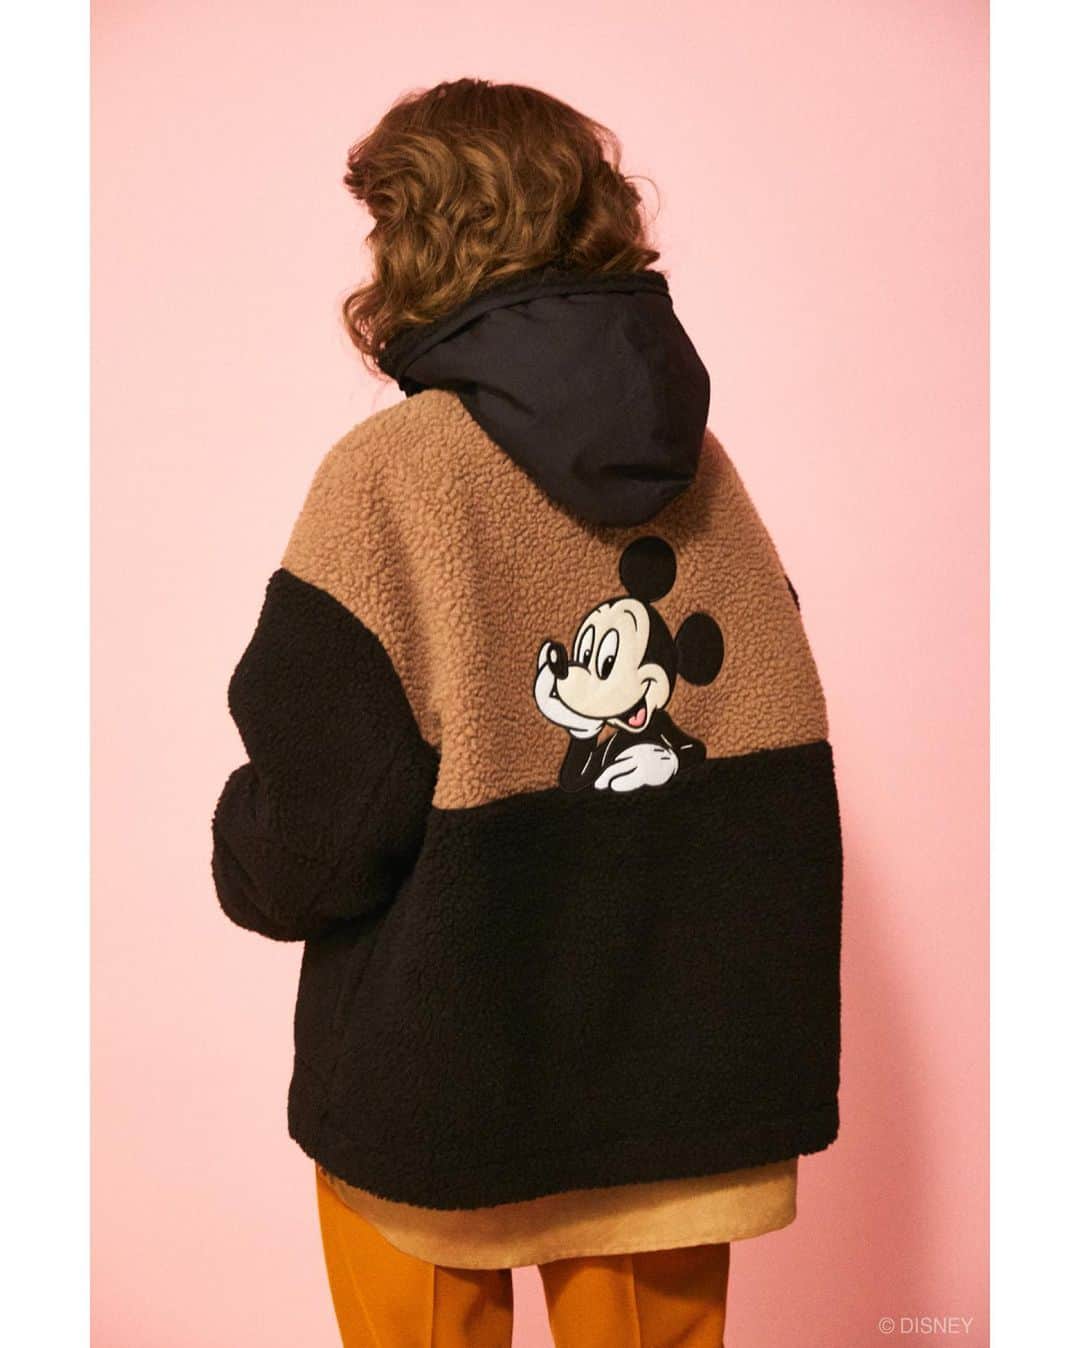 マウジーさんのインスタグラム写真 - (マウジーInstagram)「Disney SERIES CREATED by MOUSSY 15th Collection. Now on sale. --------------------------------------------- 2020 WINTER COLLECTIONでは引き続き 70s〜80sのヴィンテージテイストと90sストリートテイストをベースに レトロでノスタルジックなデザインを展開。 ㅤㅤㅤㅤㅤㅤㅤ ここでしか手に入らない魅力的なアイテムをラインナップしました。 ㅤㅤㅤㅤㅤㅤㅤ MICKEY MOUSEを愛する人たちが 素敵に見えるように。 ㅤㅤㅤㅤㅤㅤㅤㅤㅤㅤ いつまでも いくつになっても とまどうことなく ずっと着続けられる洋服。 ここで出会える特別な MICKEY MOUSEアイテムをMOUSSYは提案します。 --------------------------------------------- ・MD FUN MEMORIES JACKET(010DAY30-5060) ・MD STAMP PINS(010DAY50-5060) ・MD SMACK JAQUARD KNIT TOPS(010DAY70-5000) ・MD MICKEY FI SHEEP BOA JACKET(010DAM30-5140) ・MD BALLOON ALLOVER LONG SLEEVE SHIRT(010DAY30-5000) ・MD MICKEY HANDLE BAG(010DAT51-5120) ・MD MICKEY EMBROIDERY POLO(010DAY90-5100) ・MD MICKEY PATTERN BAG(010DAQ51-5160) ・MD LETTER BORDER KNIT TOPS(010DAY70-5040) ・MD WELCOME FRIENDS LONG COAT(010DAY30-5020) ・MD TELEPHONE! VELOUR HOODIE(010DAY90-5160) ・MD ALL MEMBERS SHIRT(010DAY30-5010) --------------------------------------------- 2020.10.21 wed Release✨ SHEL'TTER WEB STORE・The SHEL'TTER TOKYO表参道原宿店にて限定発売中！ ※一部の商品は、SHEL'TTER WEB STORE限定でオーダーが既定数に達した場合に発売が決定するスペシャルアイテムとなっております。 (※一部商品はMOUSSYルミネエスト新宿店でもお取り扱いいたします。) #MOUSSY #DisneySERIESCREATEDbyMOUSSY #MOUSSY_Disney #MICKEYMOUSE」10月21日 19時04分 - moussyofficial